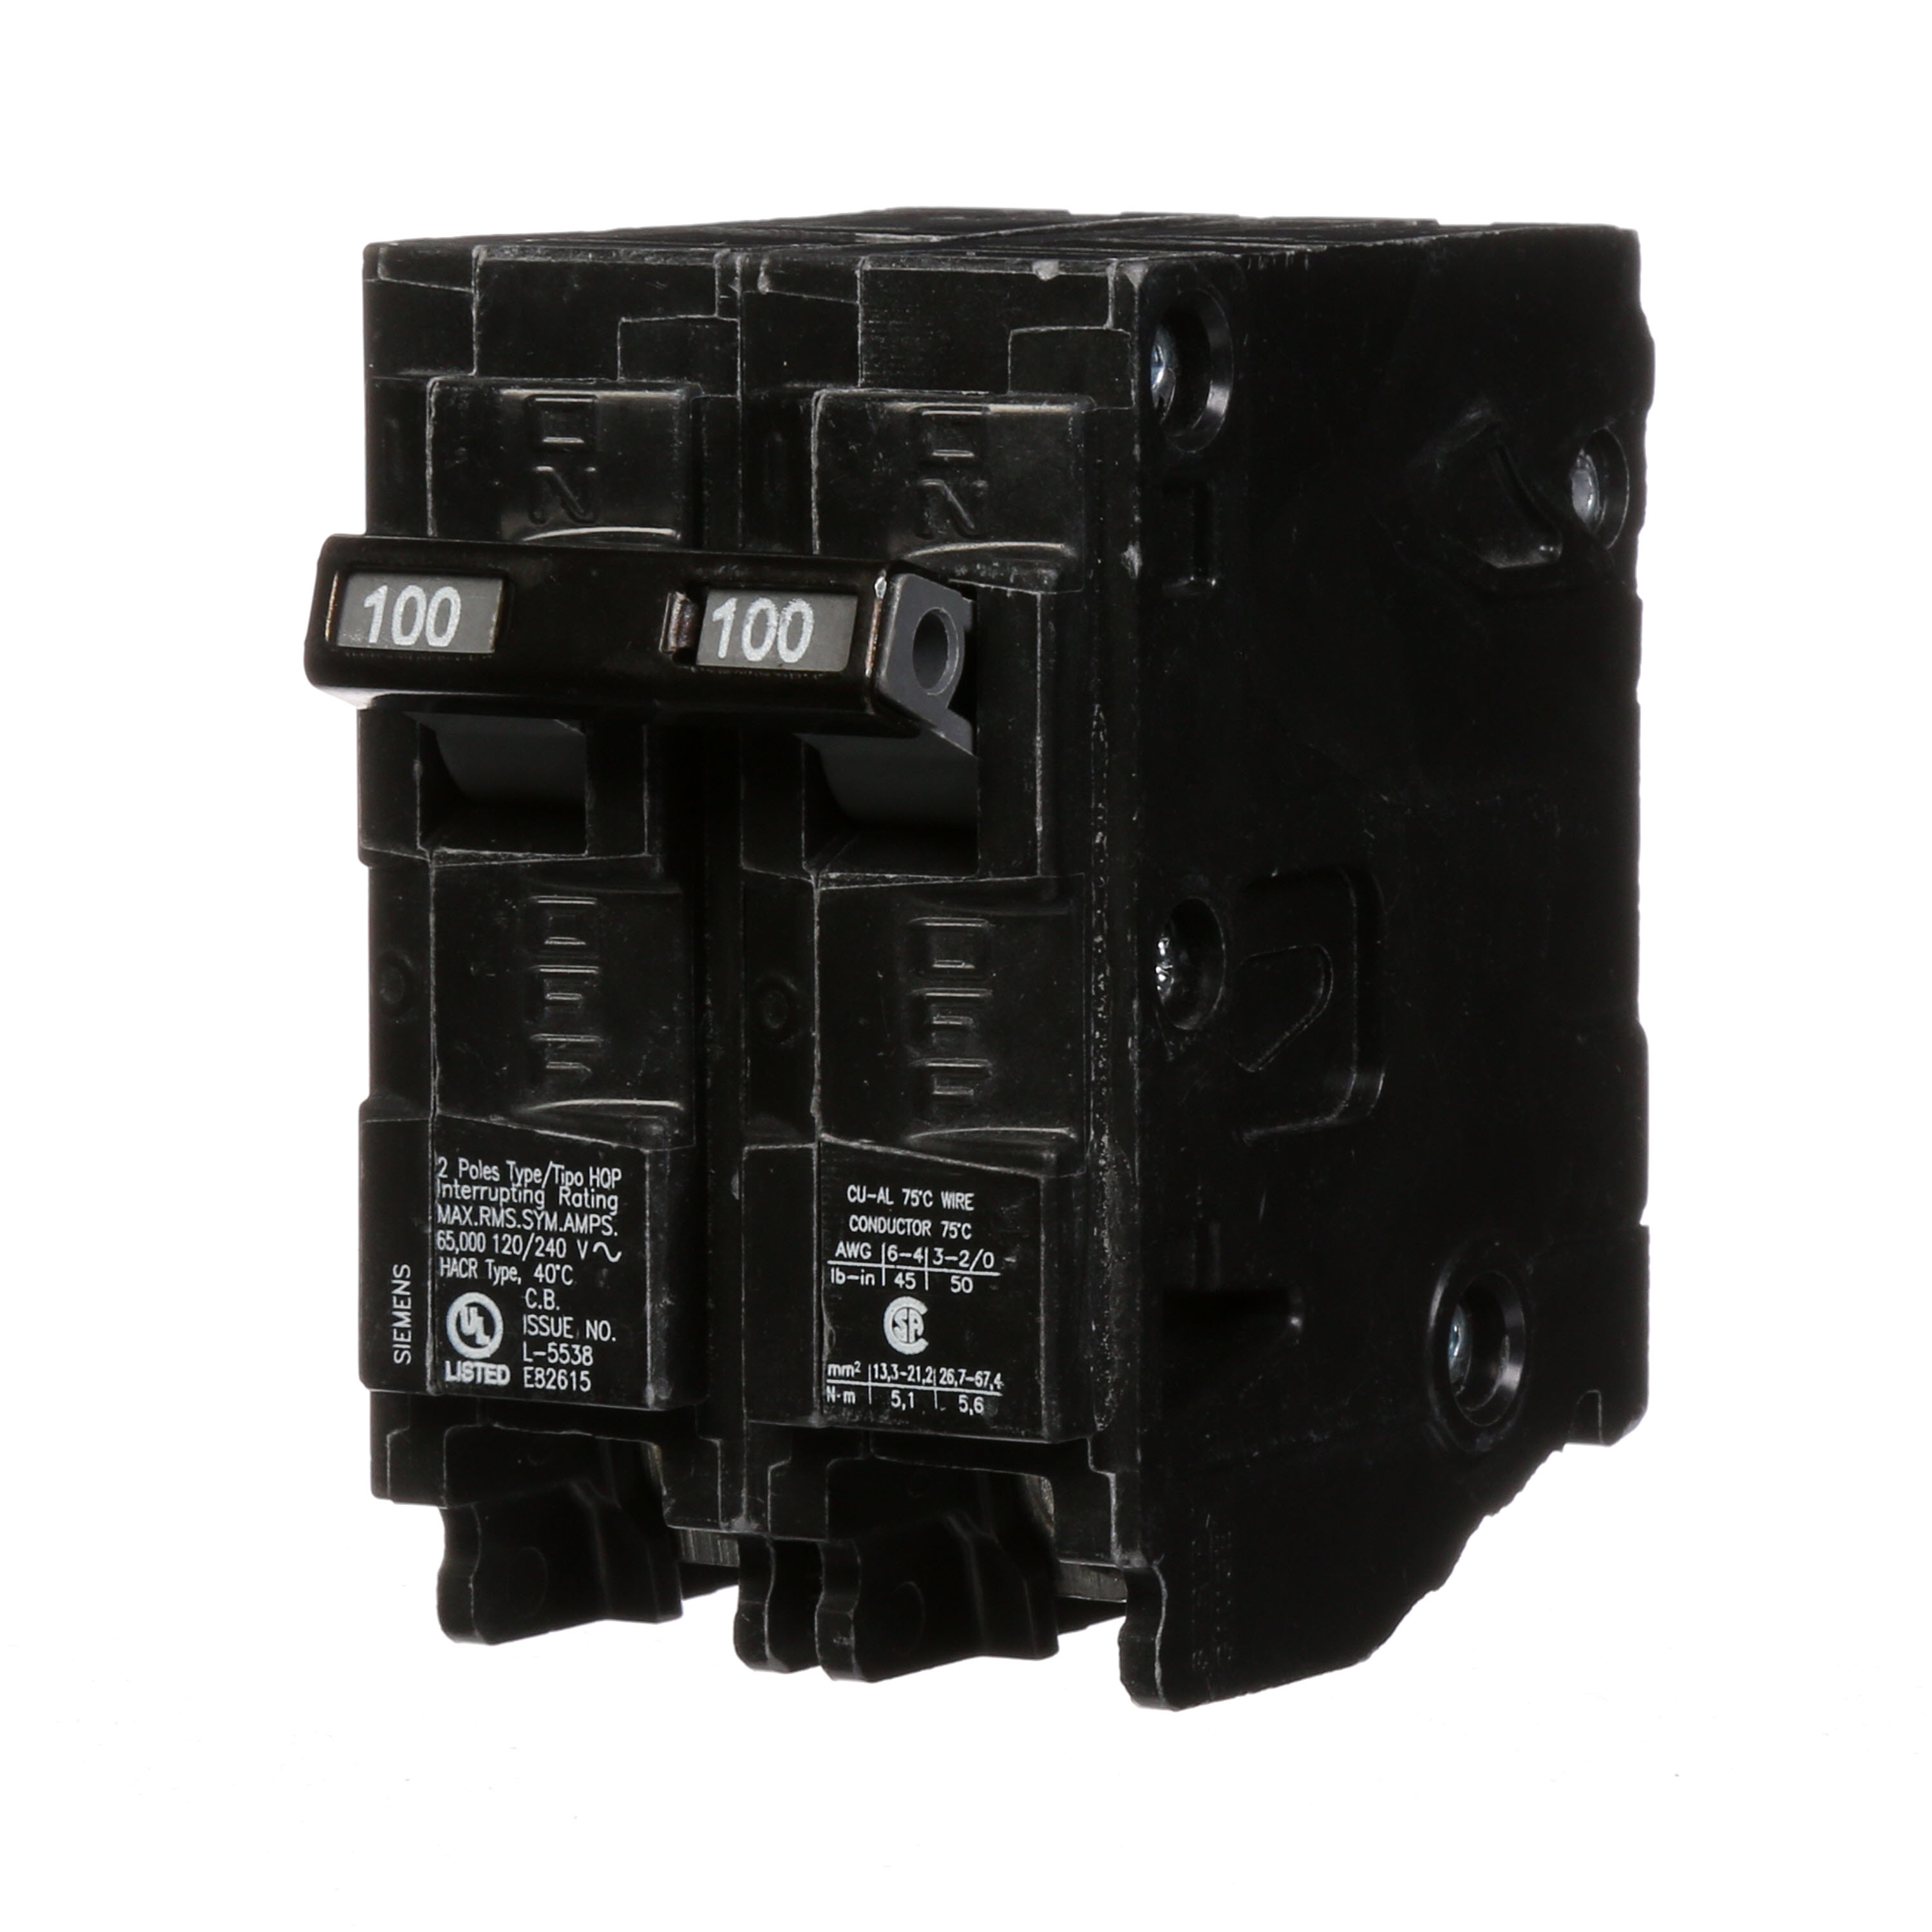 Siemens Low Voltage Residential Circuit Breakers Miniature Thermal Mag Circuit Breakers - Type QP/MP, 2-Pole, 120/240VAC are Circuit Protection Load Center Mains, Feeders, and Miniature Circuit Breakers. Type QP/MP Application Electrical Distribution Standard UL 489 Voltage Rating 120/240V Amperage Rating 100A Trip Range Thermal Magnetic Interrupt Rating 65 AIC Number Of Poles 2P